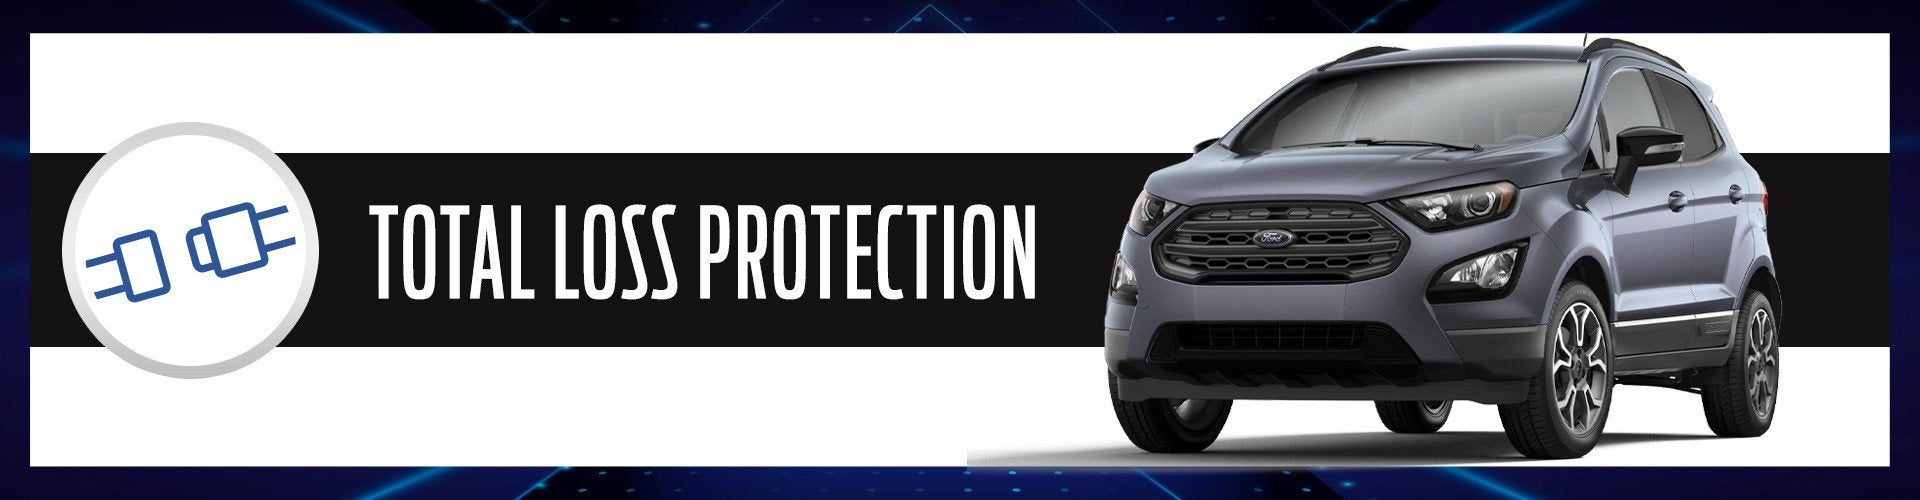 Vehicle Protection | Key Scales Ford Inc in Leesburg FL